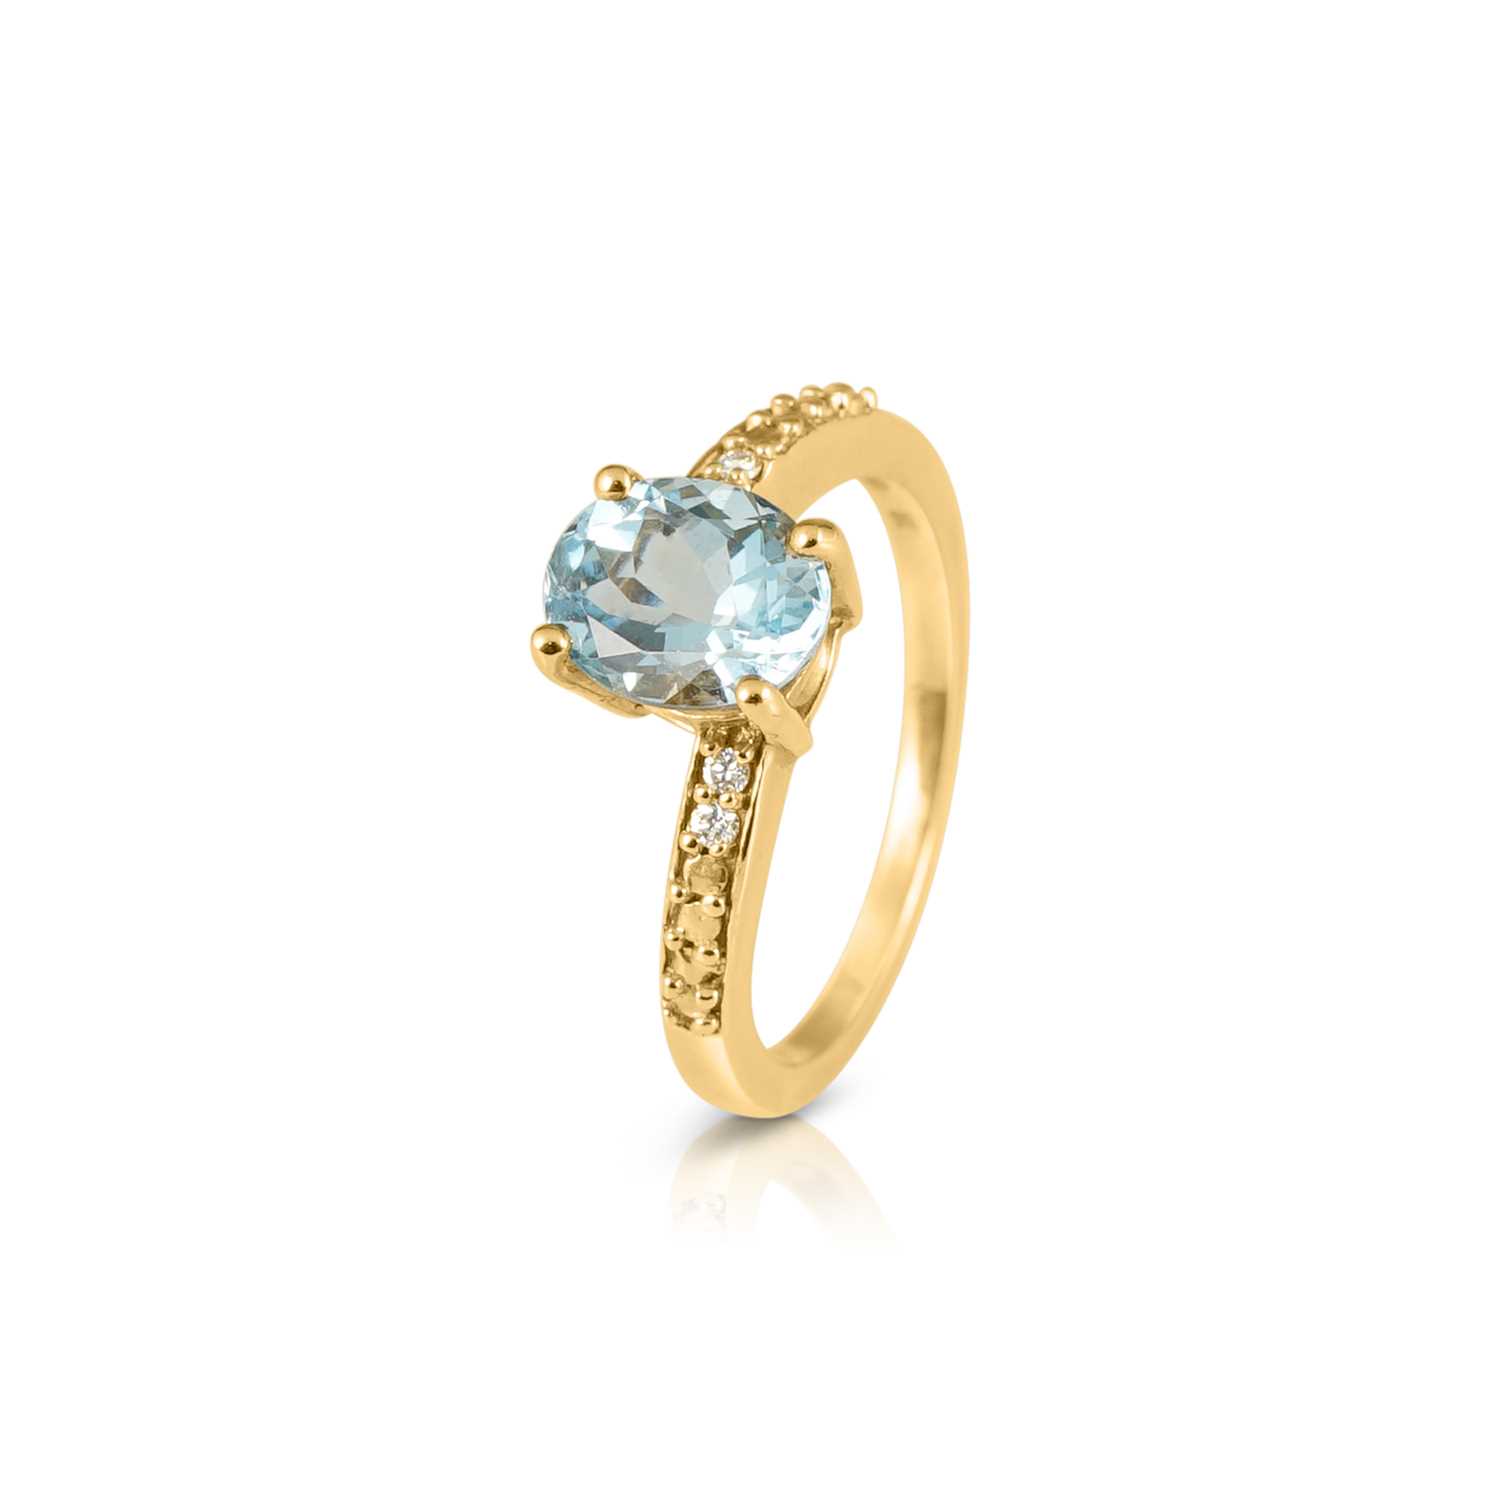 Lot 475 - Gold Ring set with Aquamarine Solitaire and Diamonds